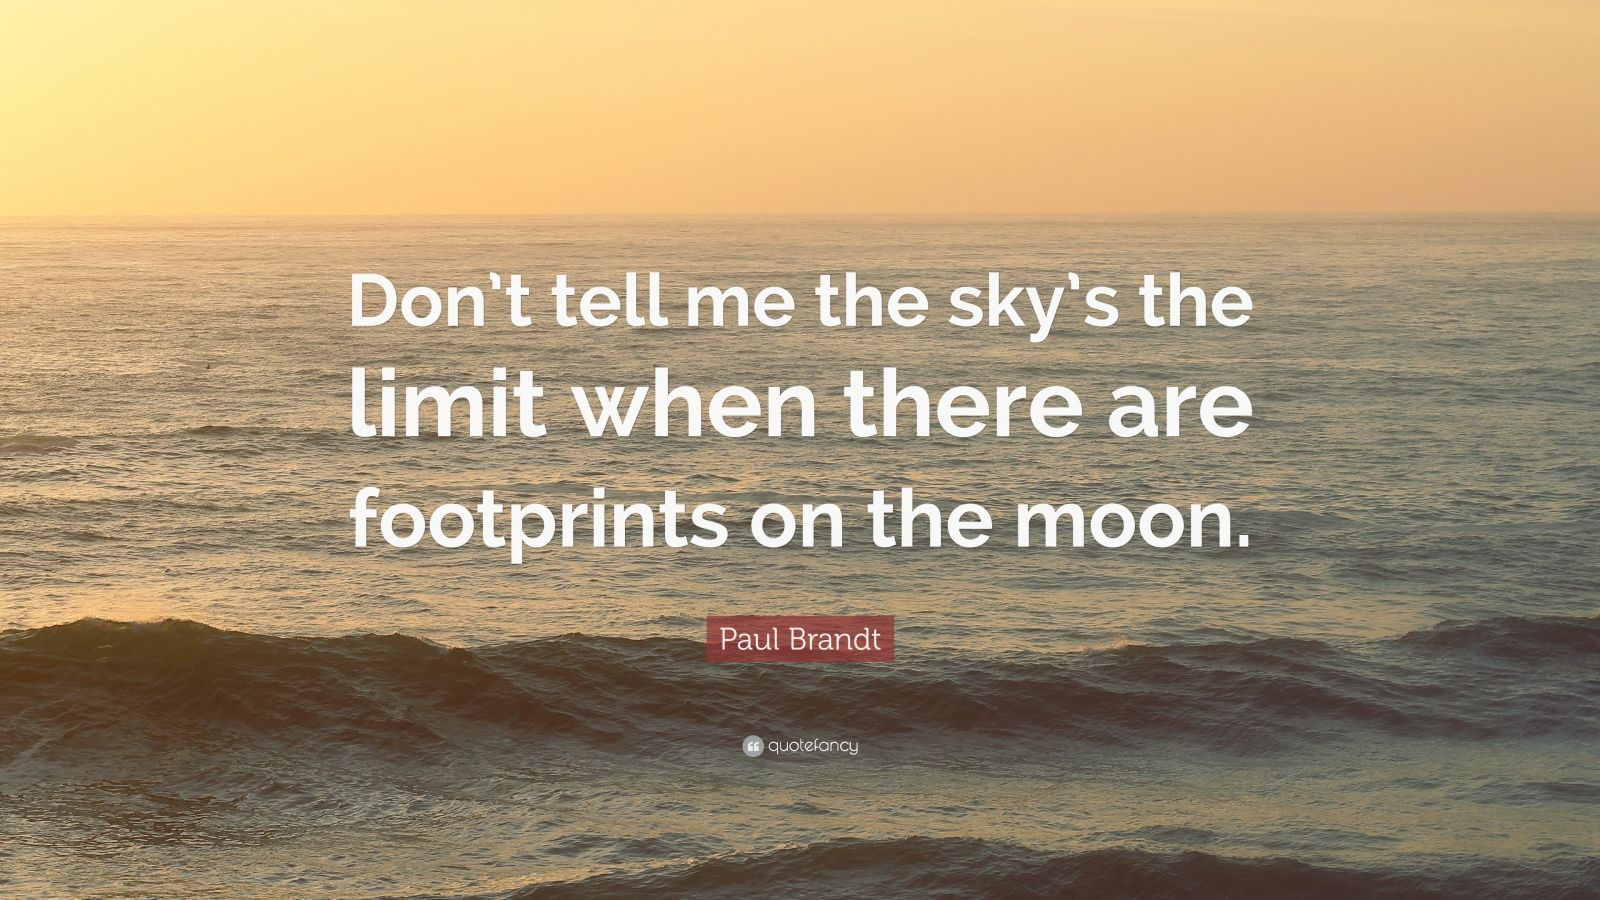 Paul Brandt Quote: "Don't tell me the sky's the limit when ...